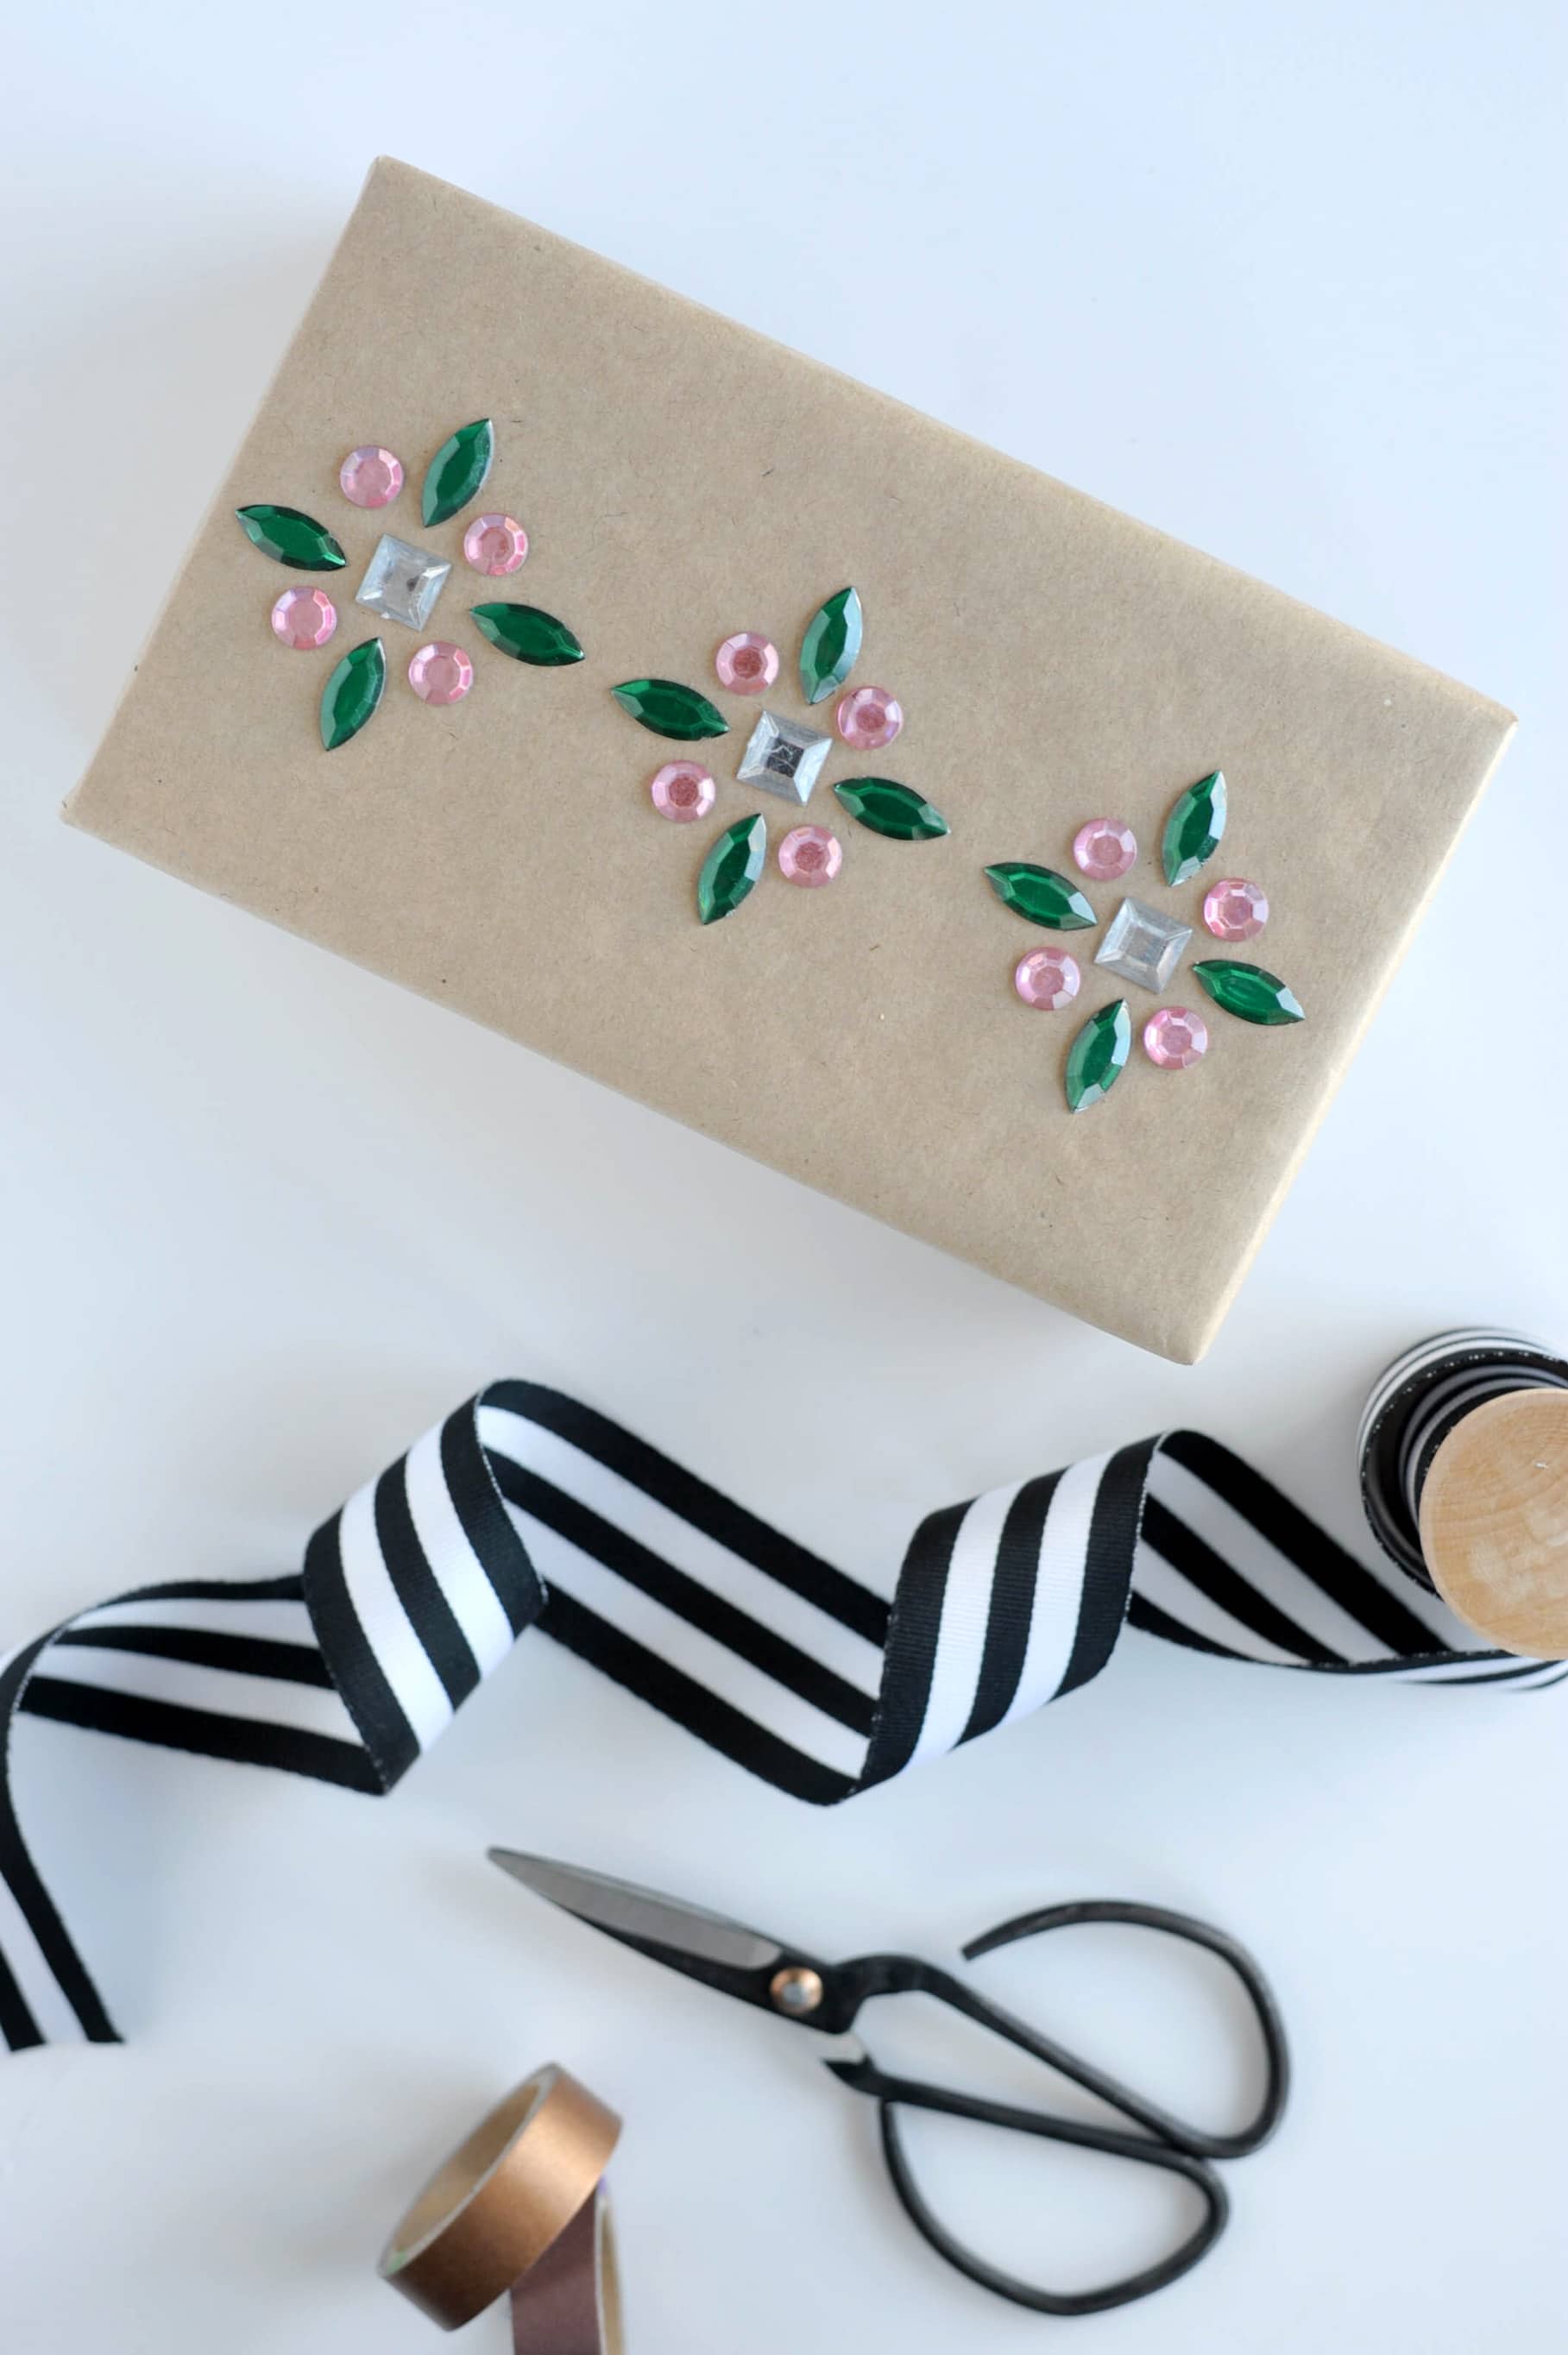 Add some color and pretty patterns to your gift wrap with self adhesive rhinestones!